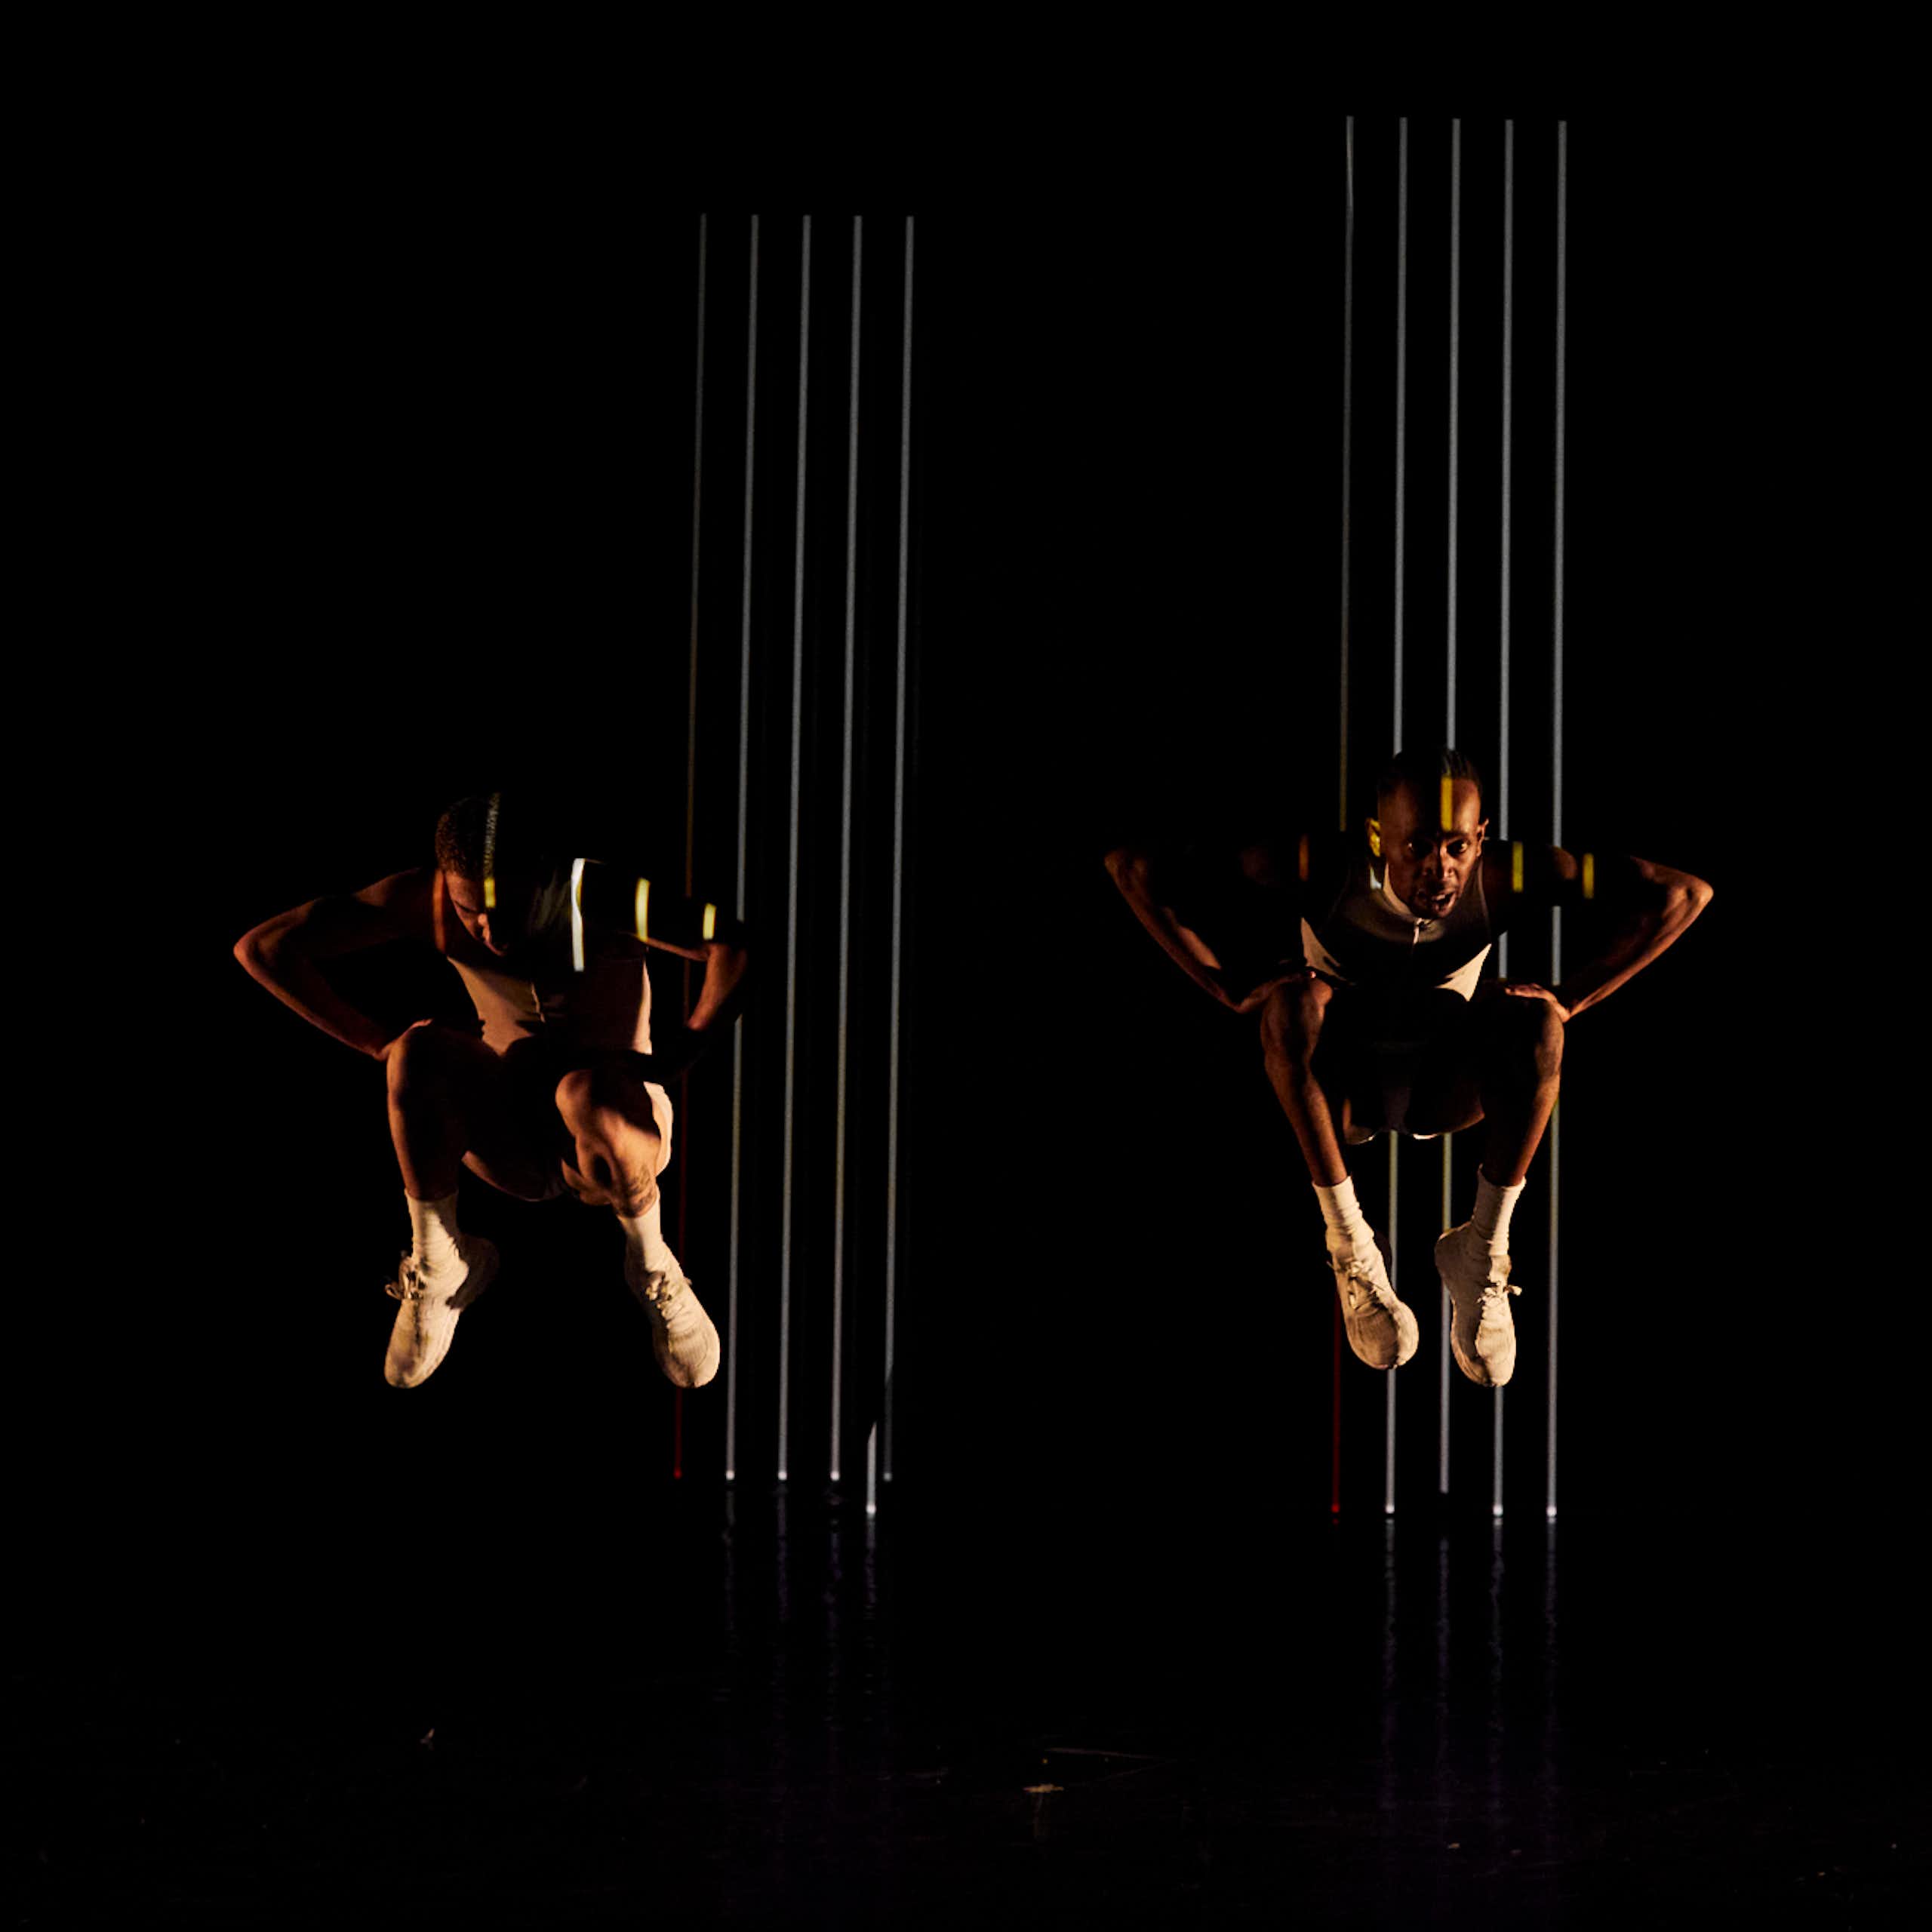 Three dancers against a black backdrop, suspended in the air.